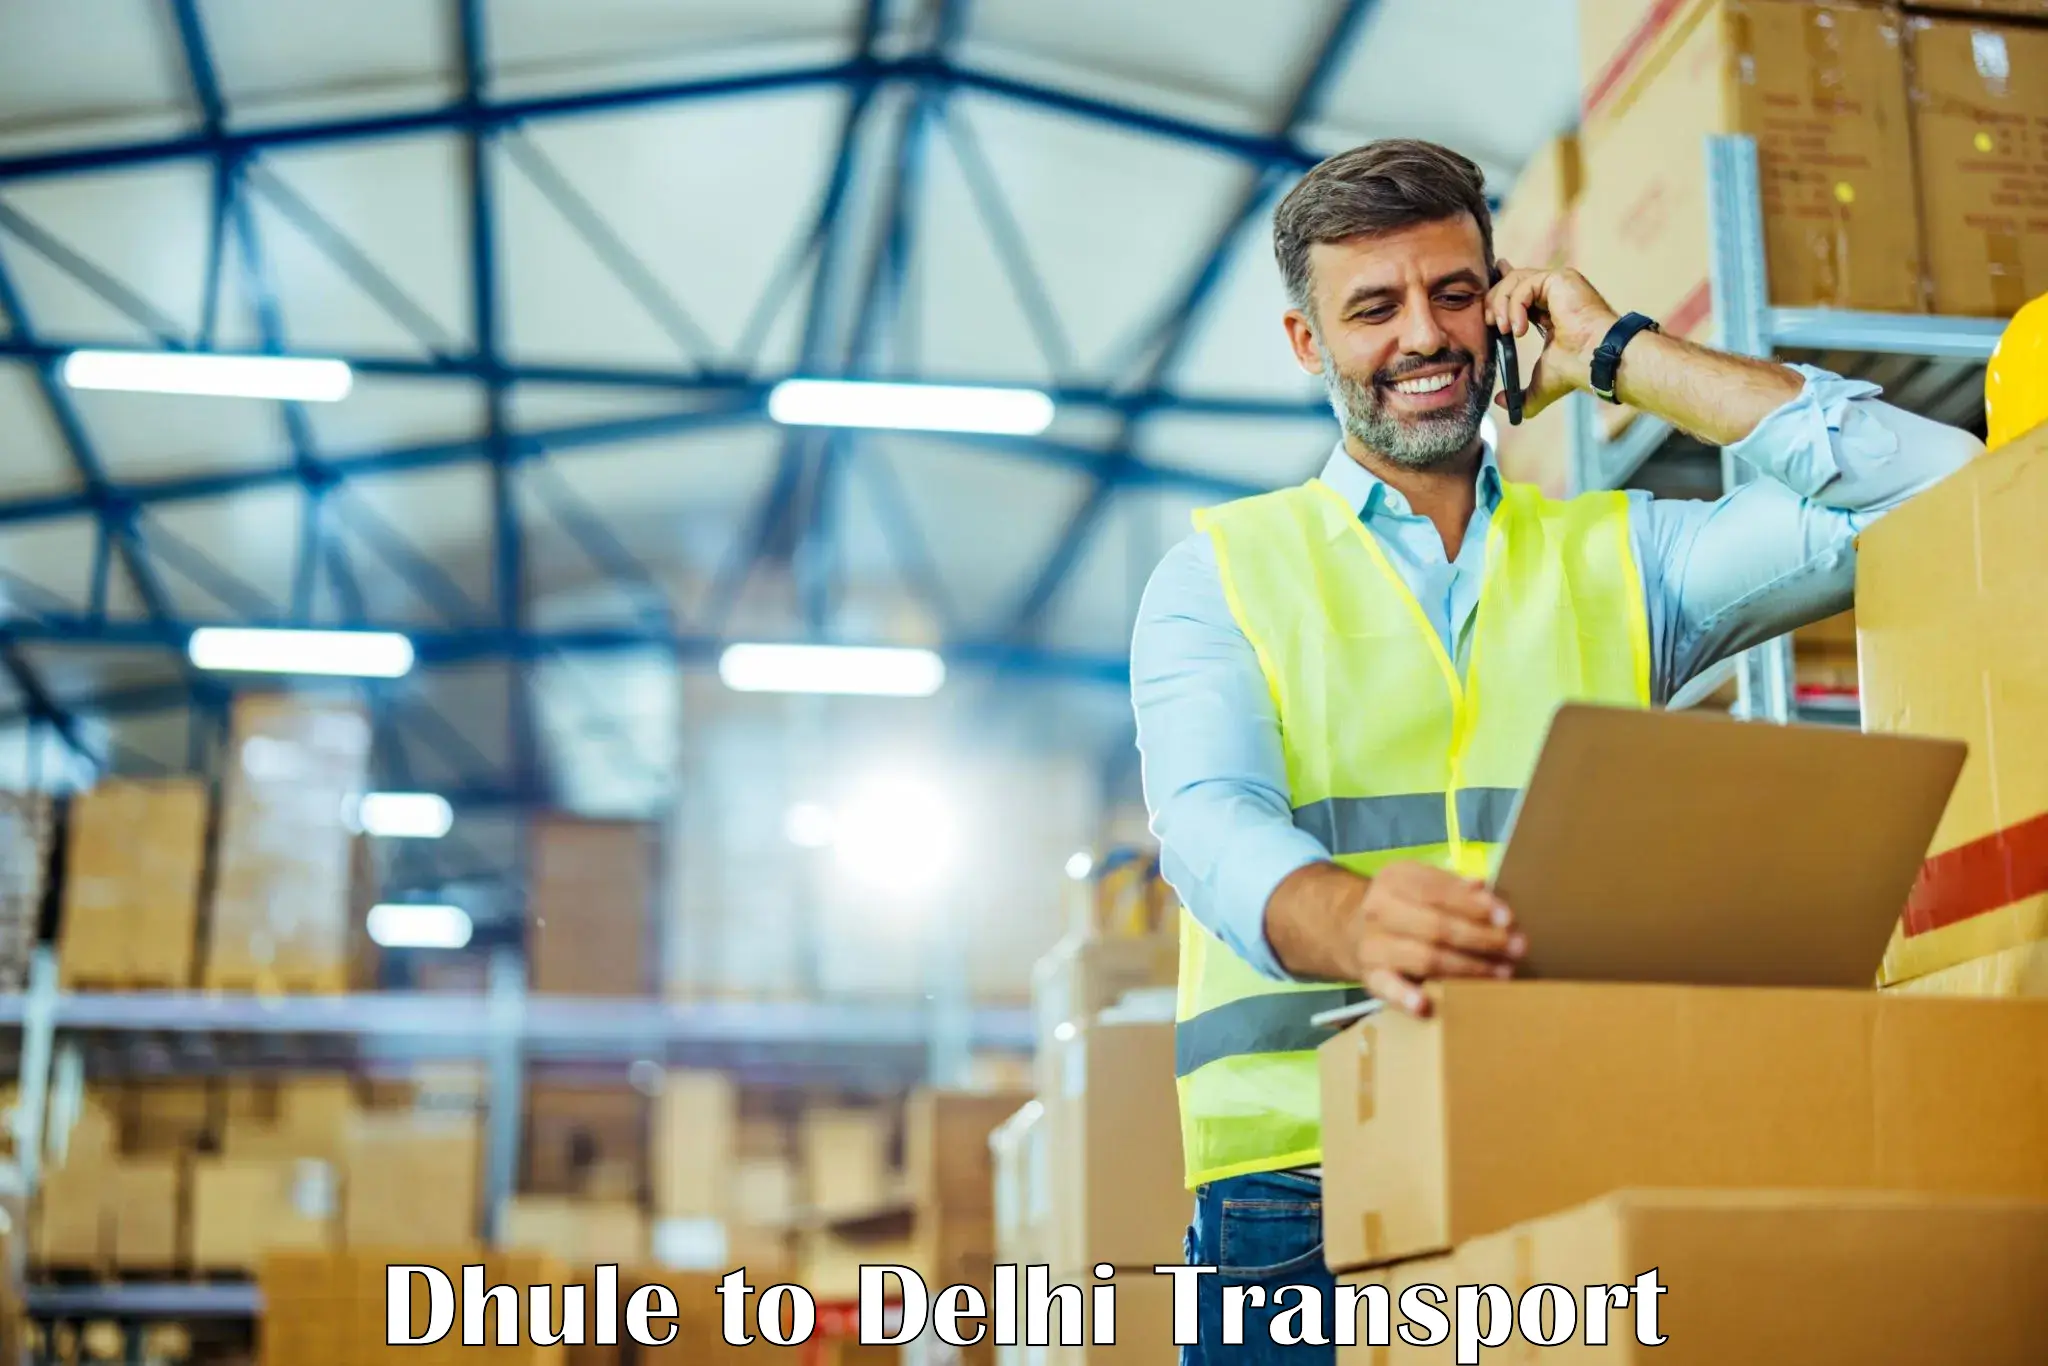 Cycle transportation service Dhule to Delhi